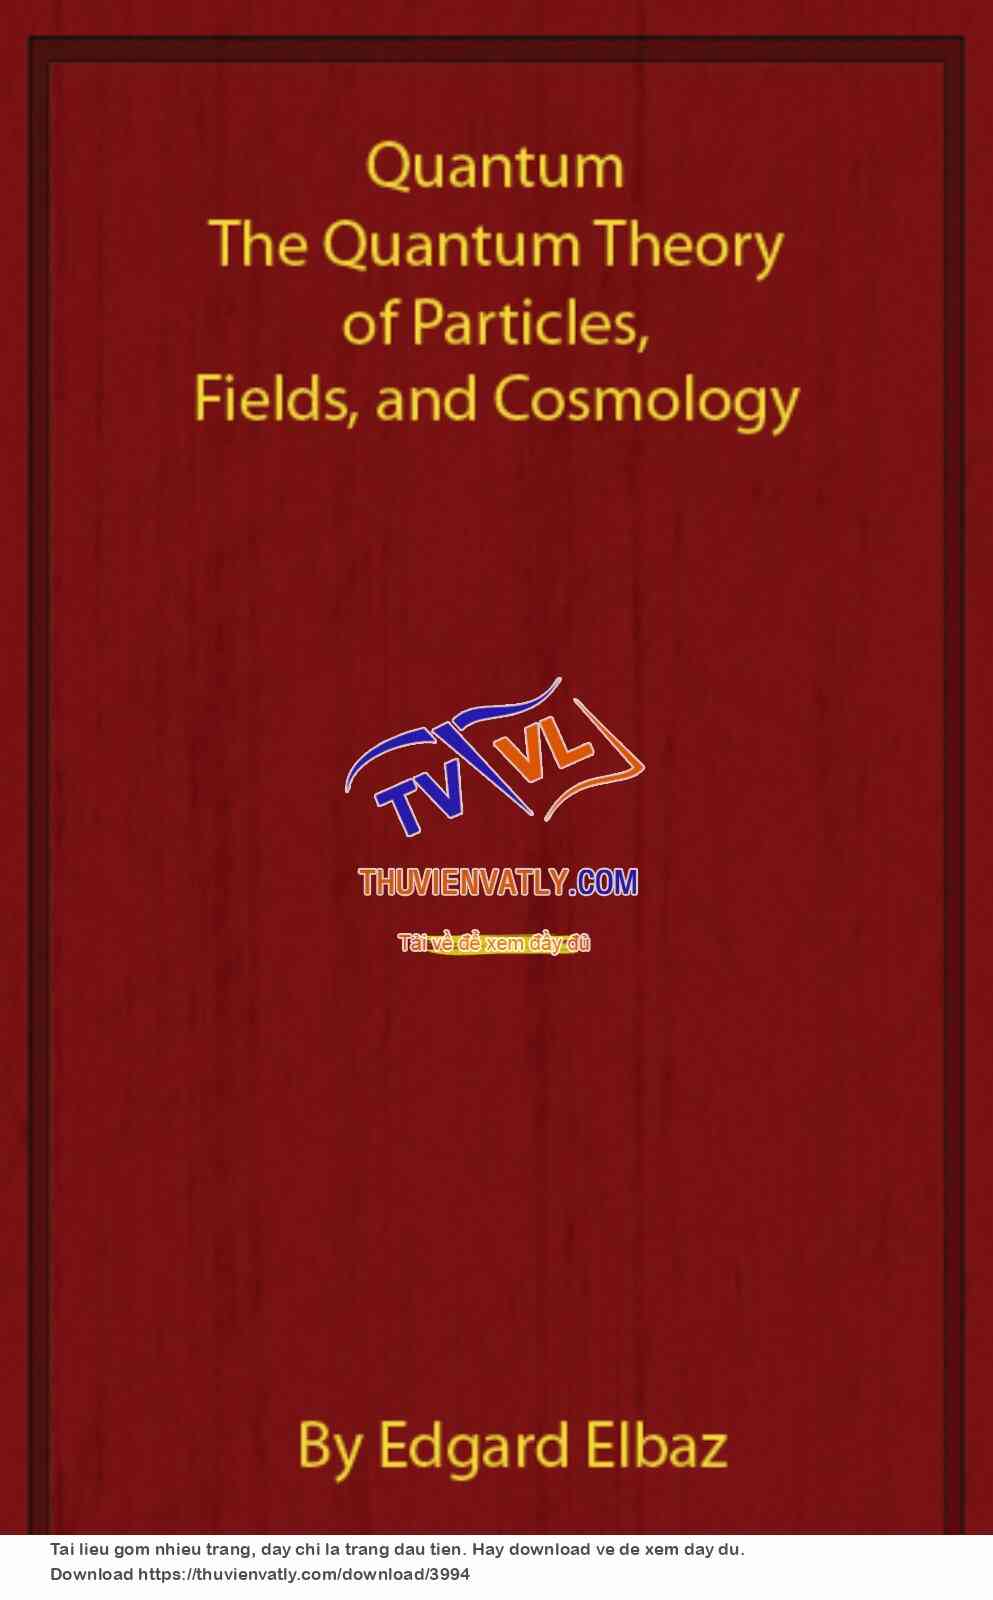 The Quantum Theory of Particles, Fields, and Cosmology (Edgard Elbaz)